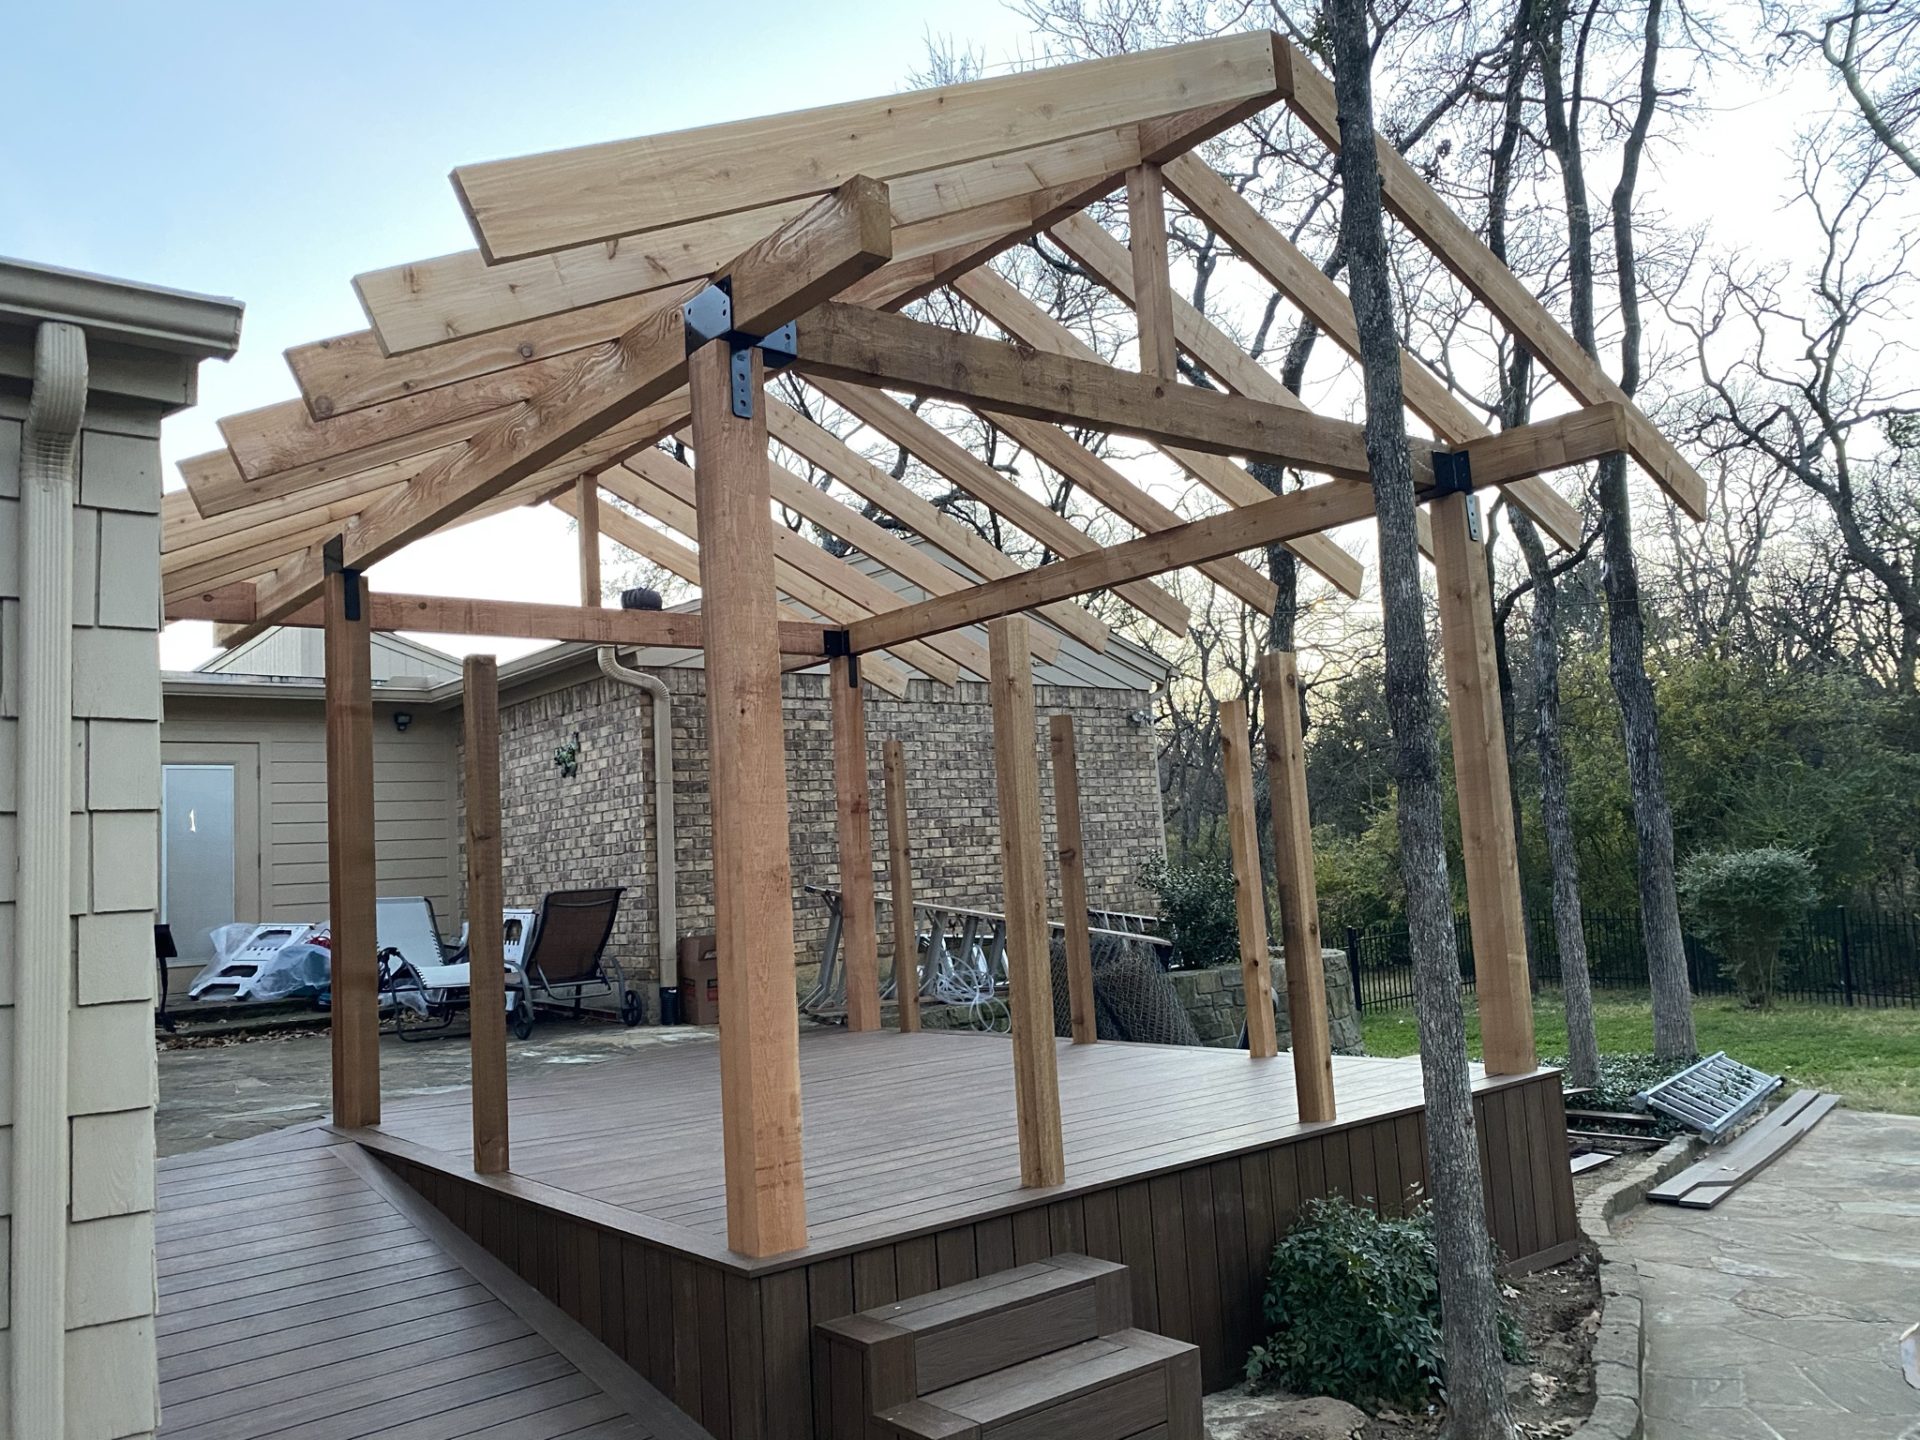 Patio deck completed and 4 frame posts set up for patio roof installation along with roof cross support beams.